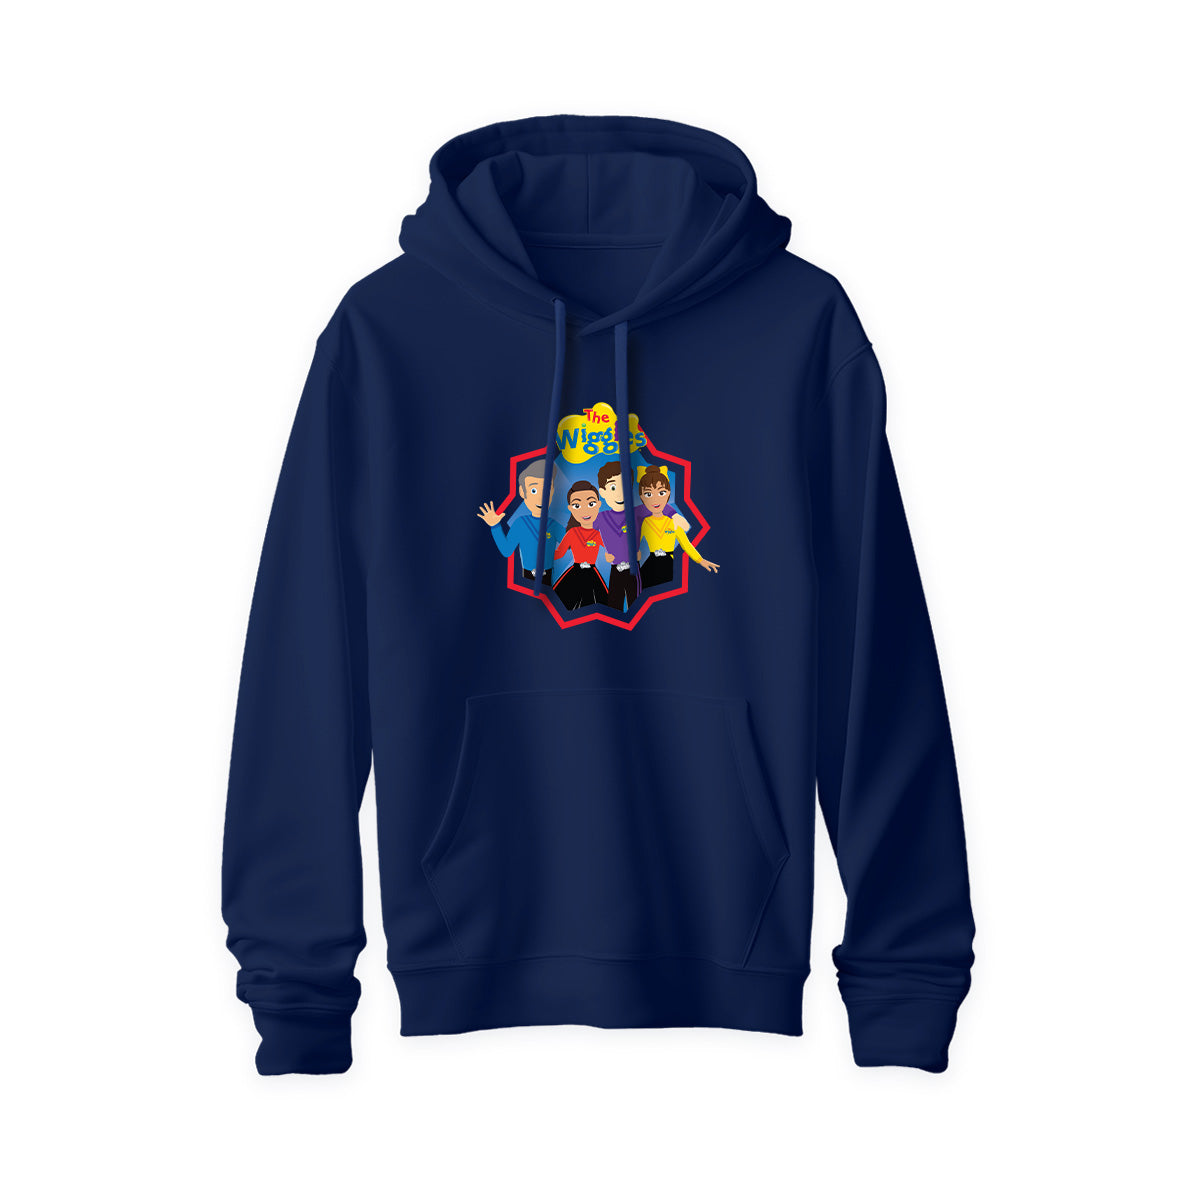 The Wiggles Adult Group Hoodie V2